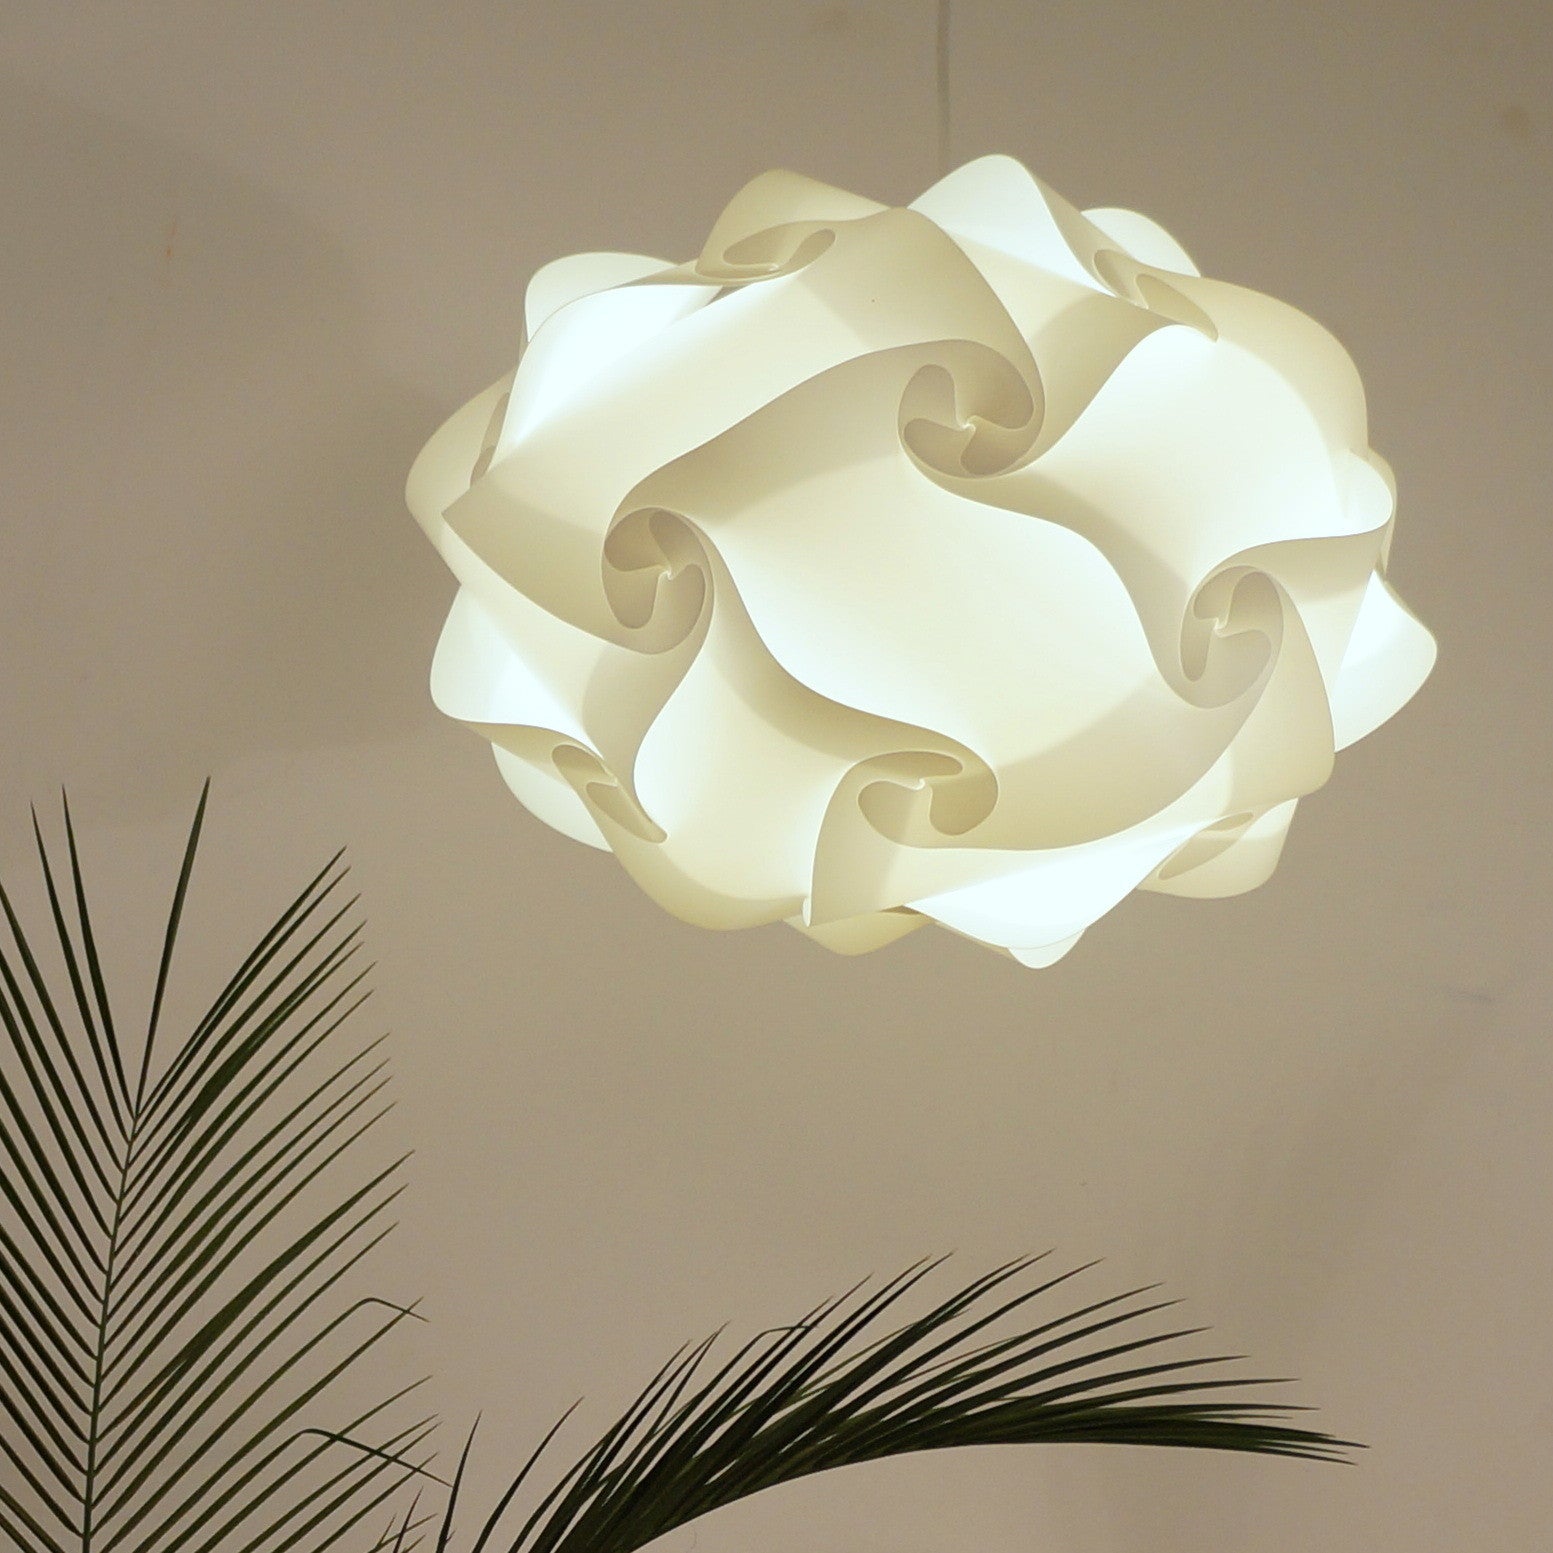 Smarty Lamps Tukia Ceiling Light Shade  Smart Deco Homeware Lighting and Art by Jacqueline hammond